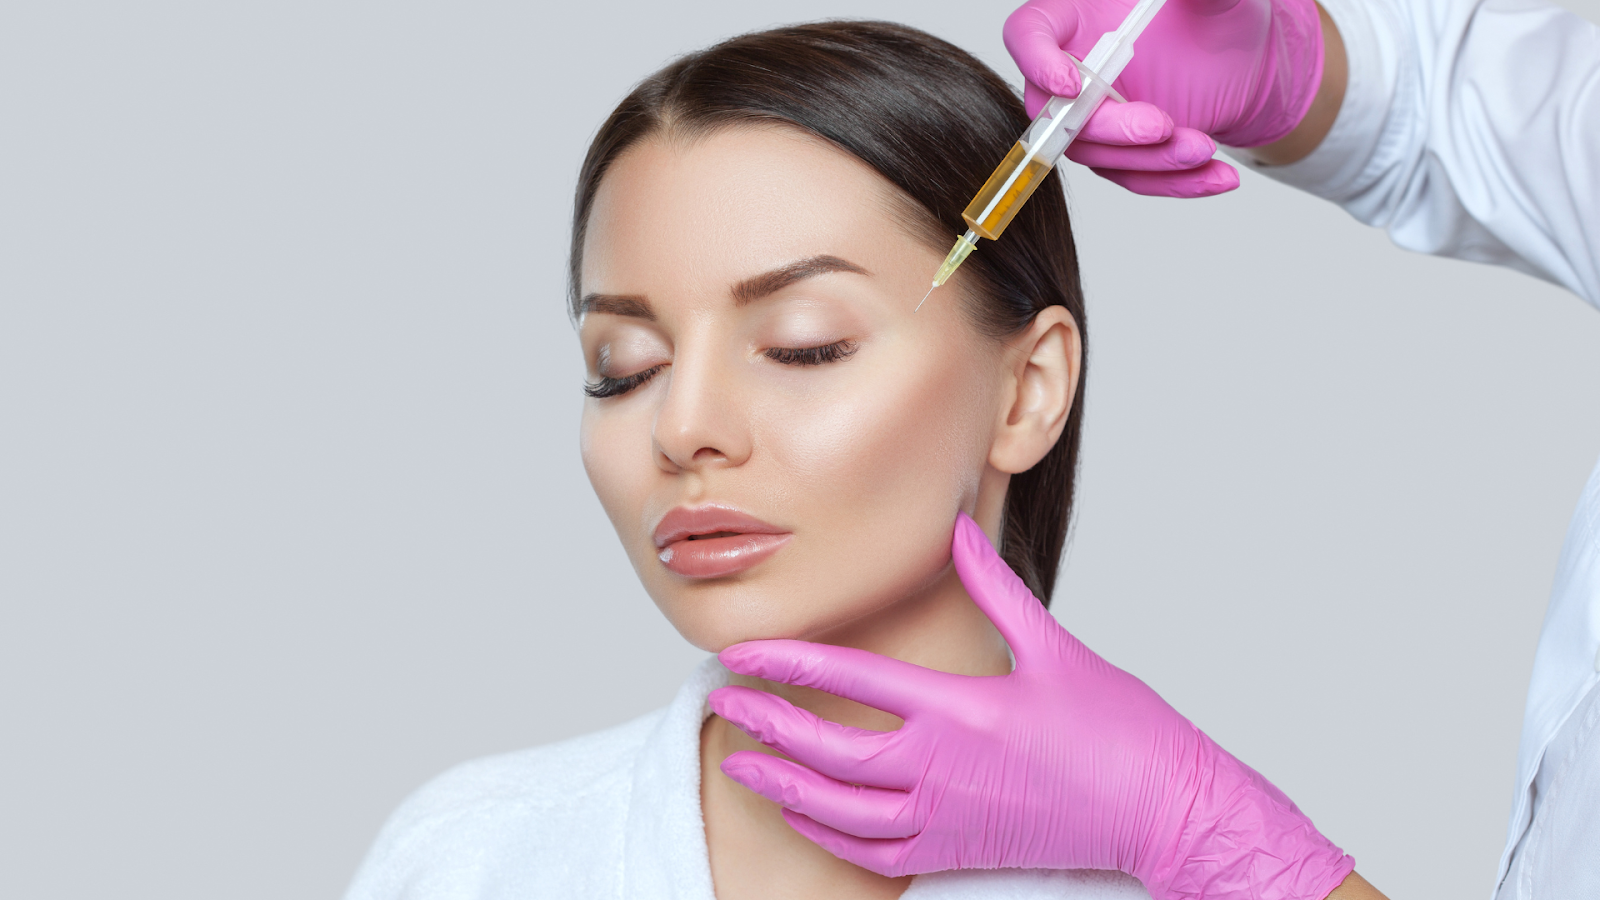 Restoring Youthful Skin And Growing Thicker Hair Platelet Rich Plasma (PRP) For Skin Rejuvenation